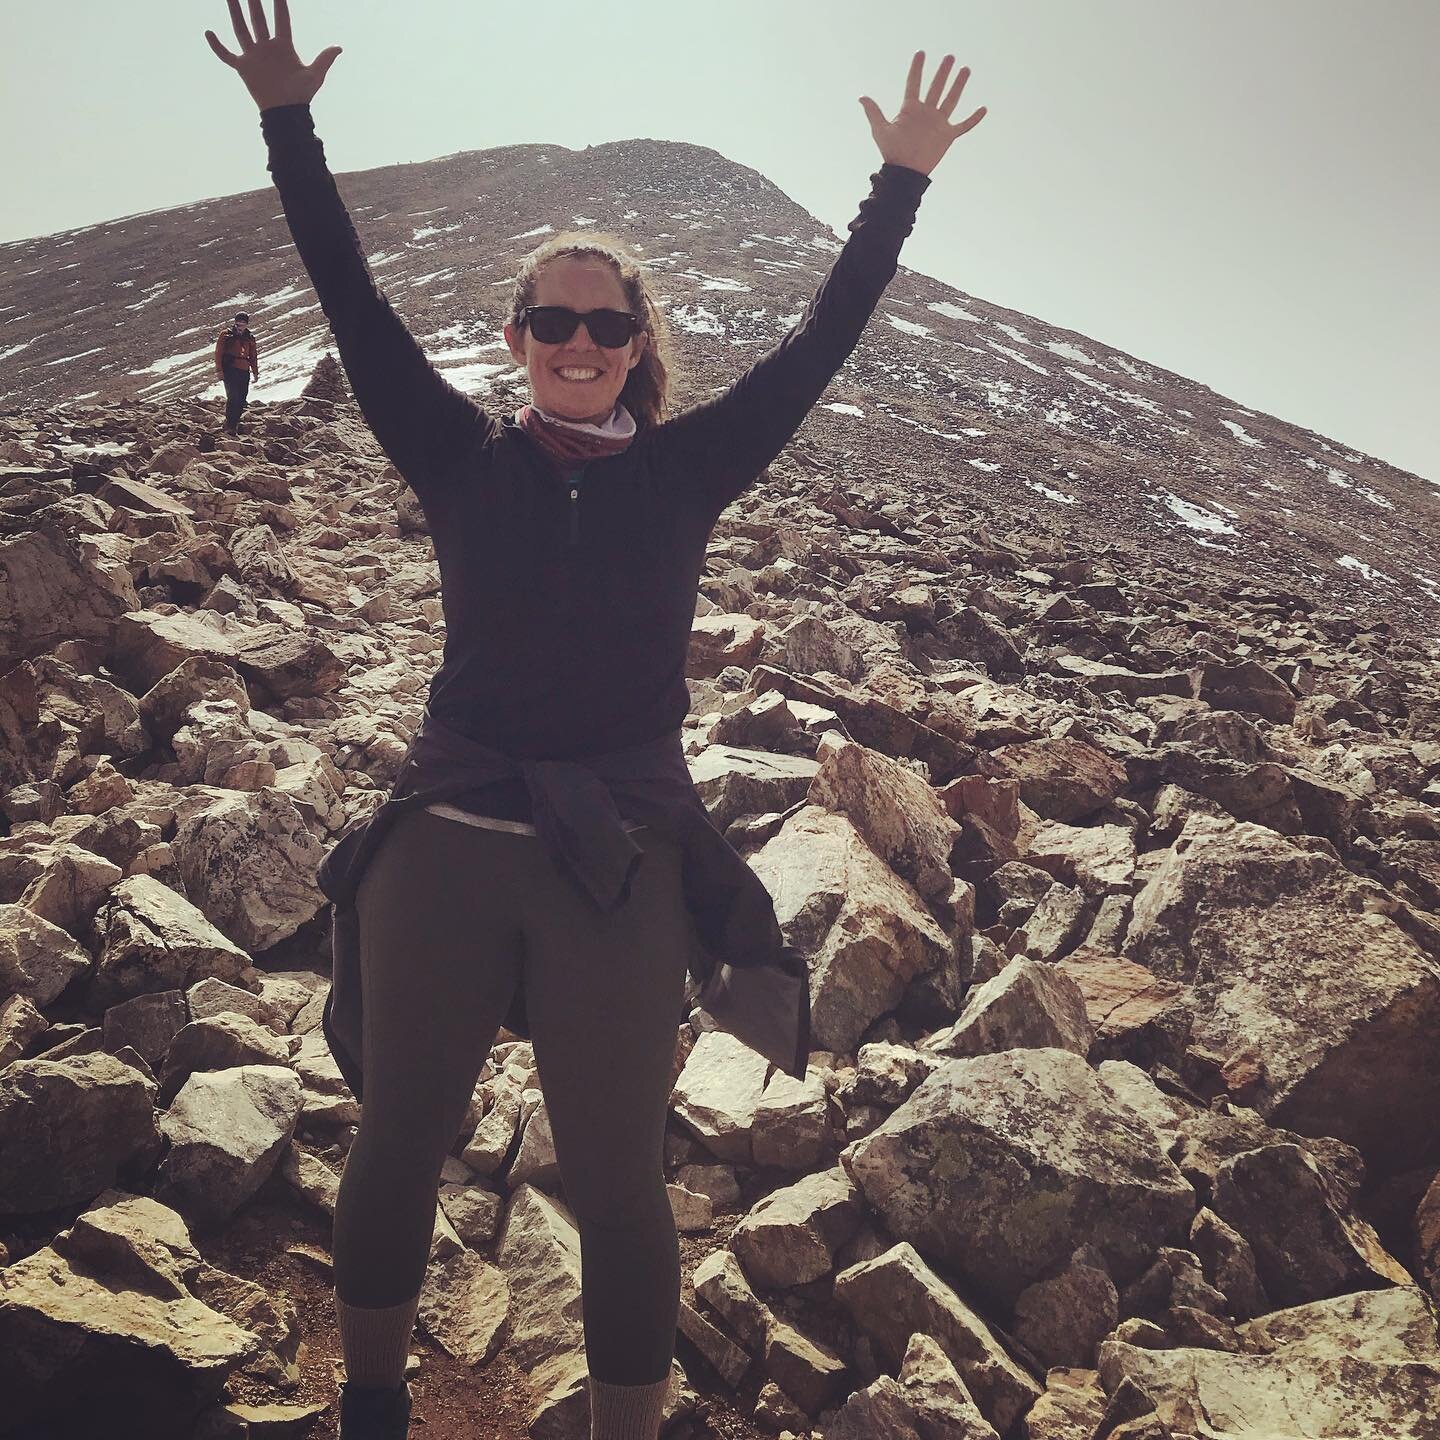 Happy Wednesday IG! This is me from last week with Grays Peak behind me. I felt on top of the world (pun totally intended).

Getting outside and using my body in a way that reminds me I&rsquo;m alive is one of my favorite ways to find gratitude. 

Th